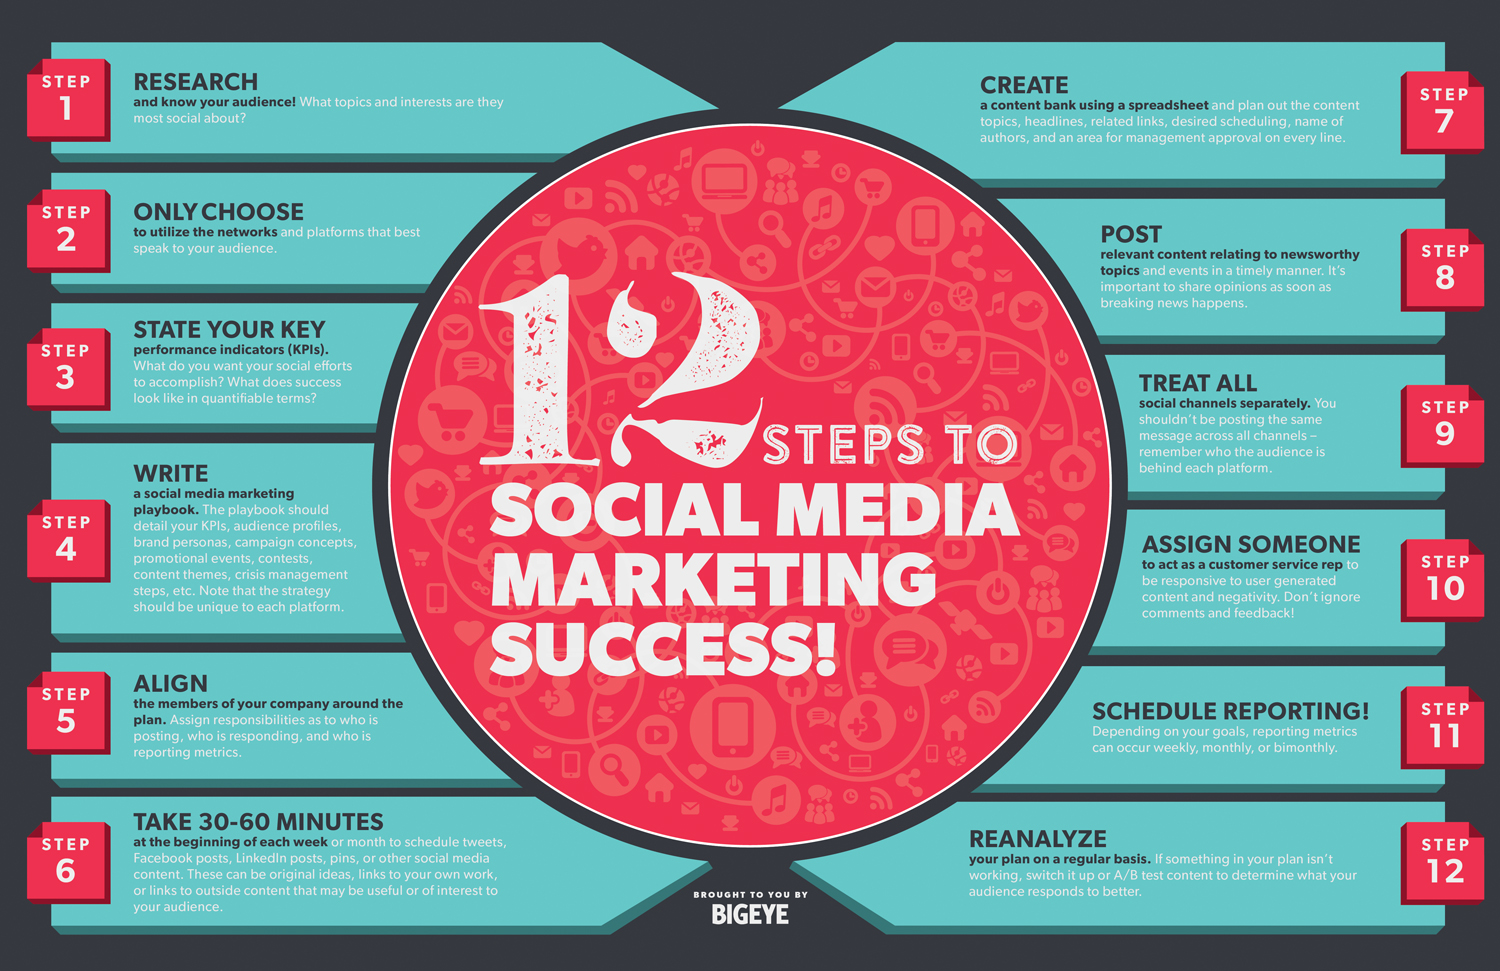  A flowchart image listing the twelve steps to social media marketing success including research, choosing the right channels, setting goals, writing a social media marketing plan, creating content, posting, treating all channels separately, assigning roles, scheduling, and analyzing results.